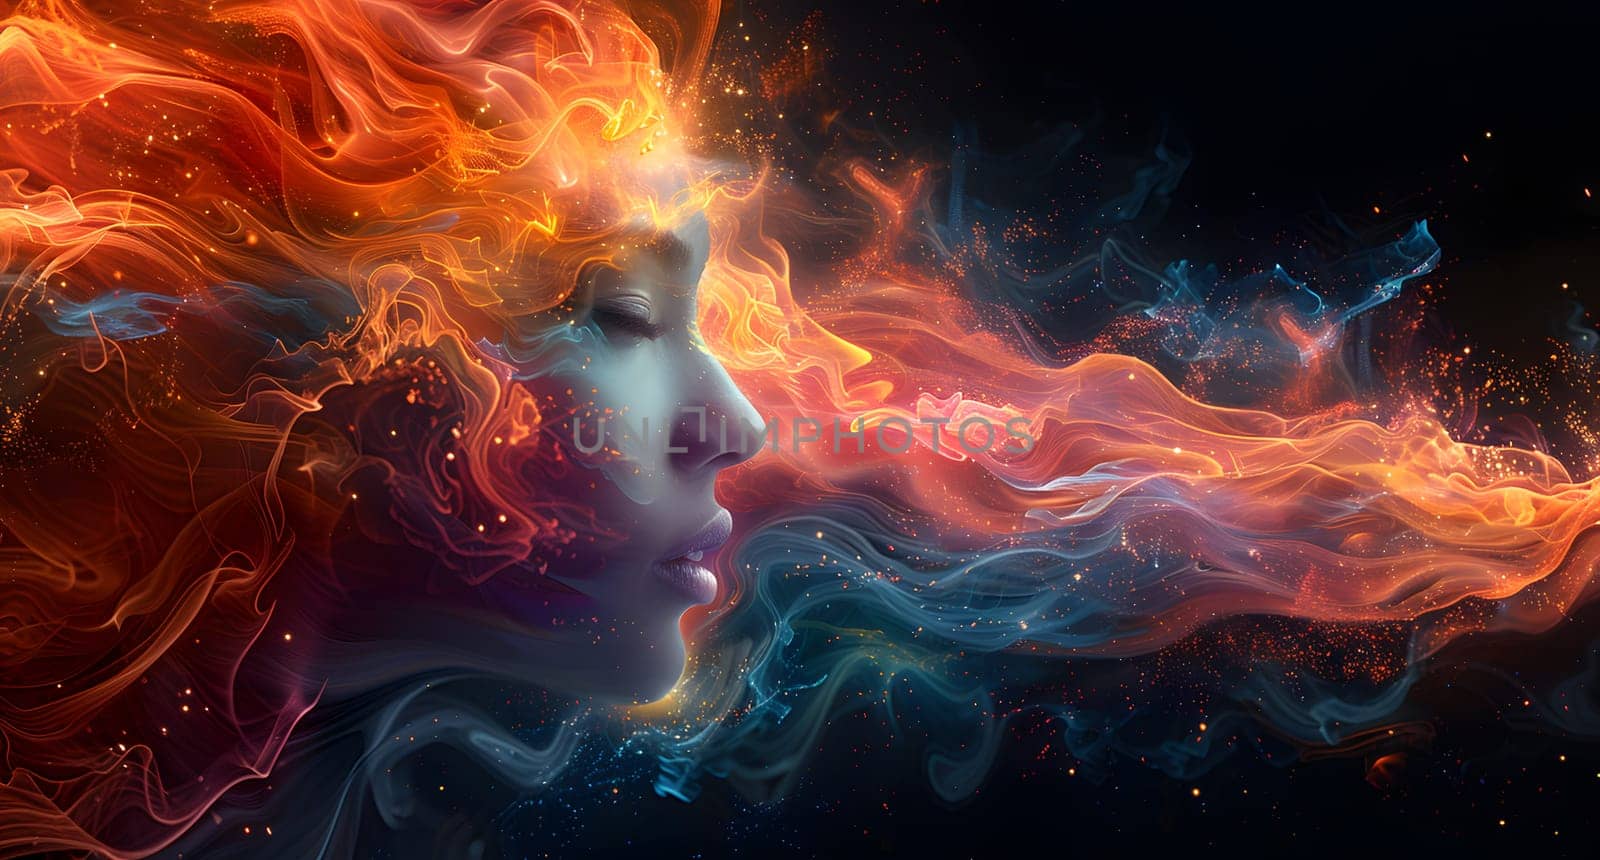 A woman with fiery red hair is exhaling flames into the atmosphere, creating a dramatic display of fire against the electric blue sky